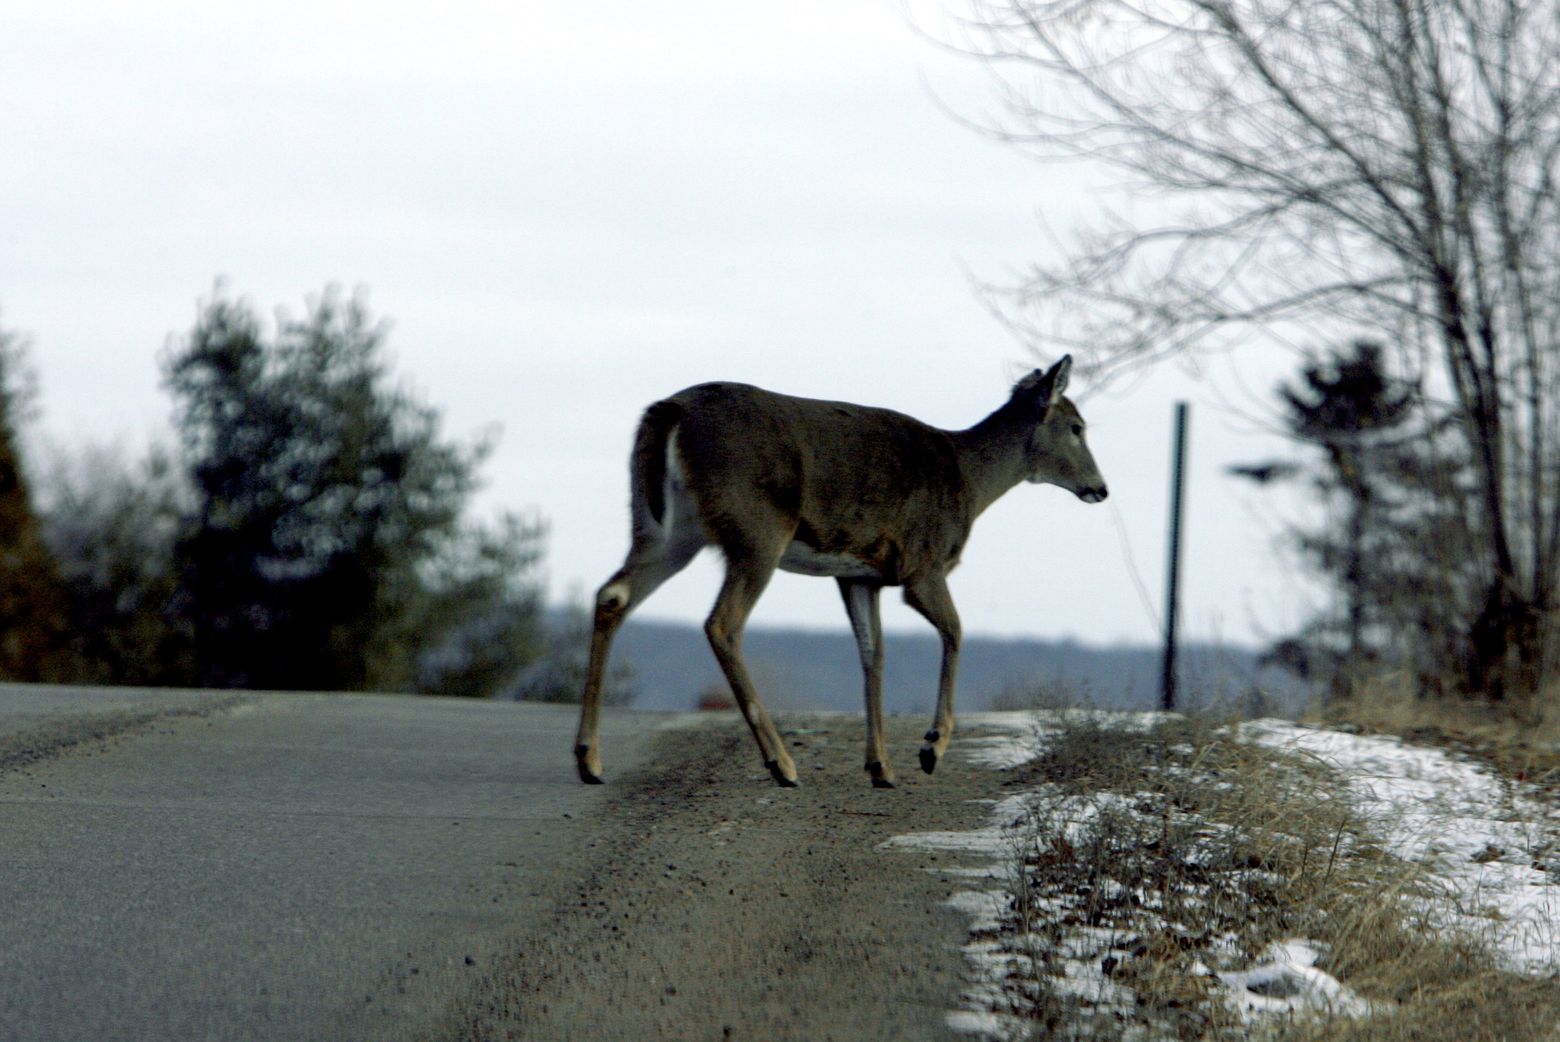 Minnesota roadkill enthusiasts eat thousands of animals killed by cars |  The Seattle Times